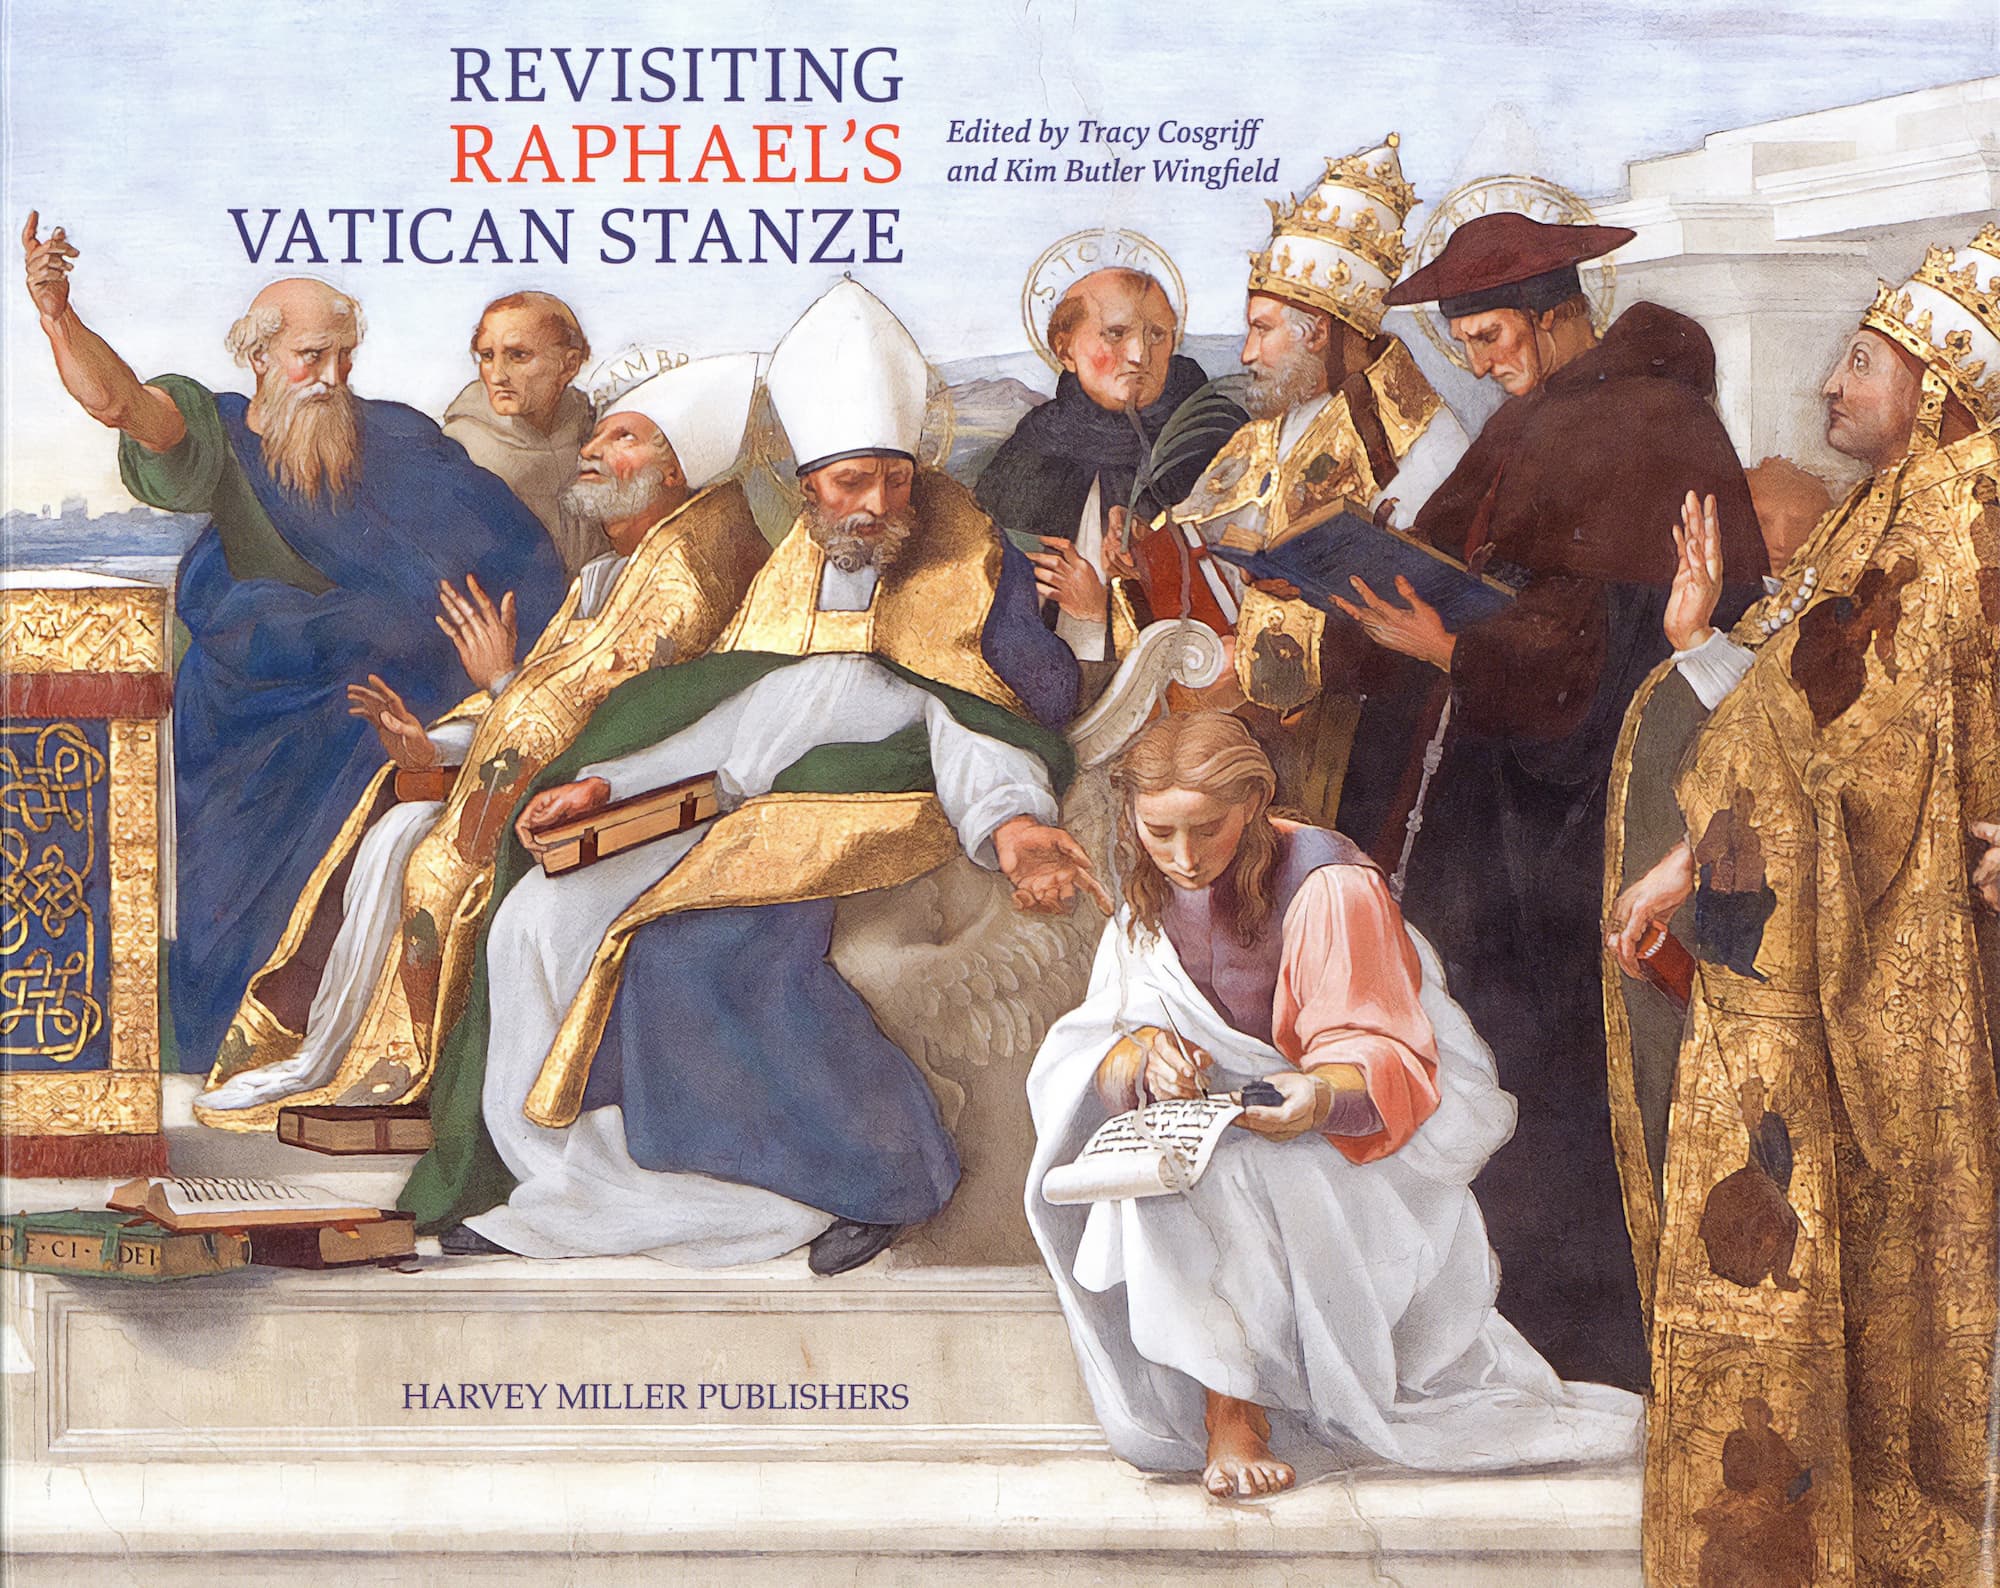 Cover image of Revisiting Raphael's Stanze